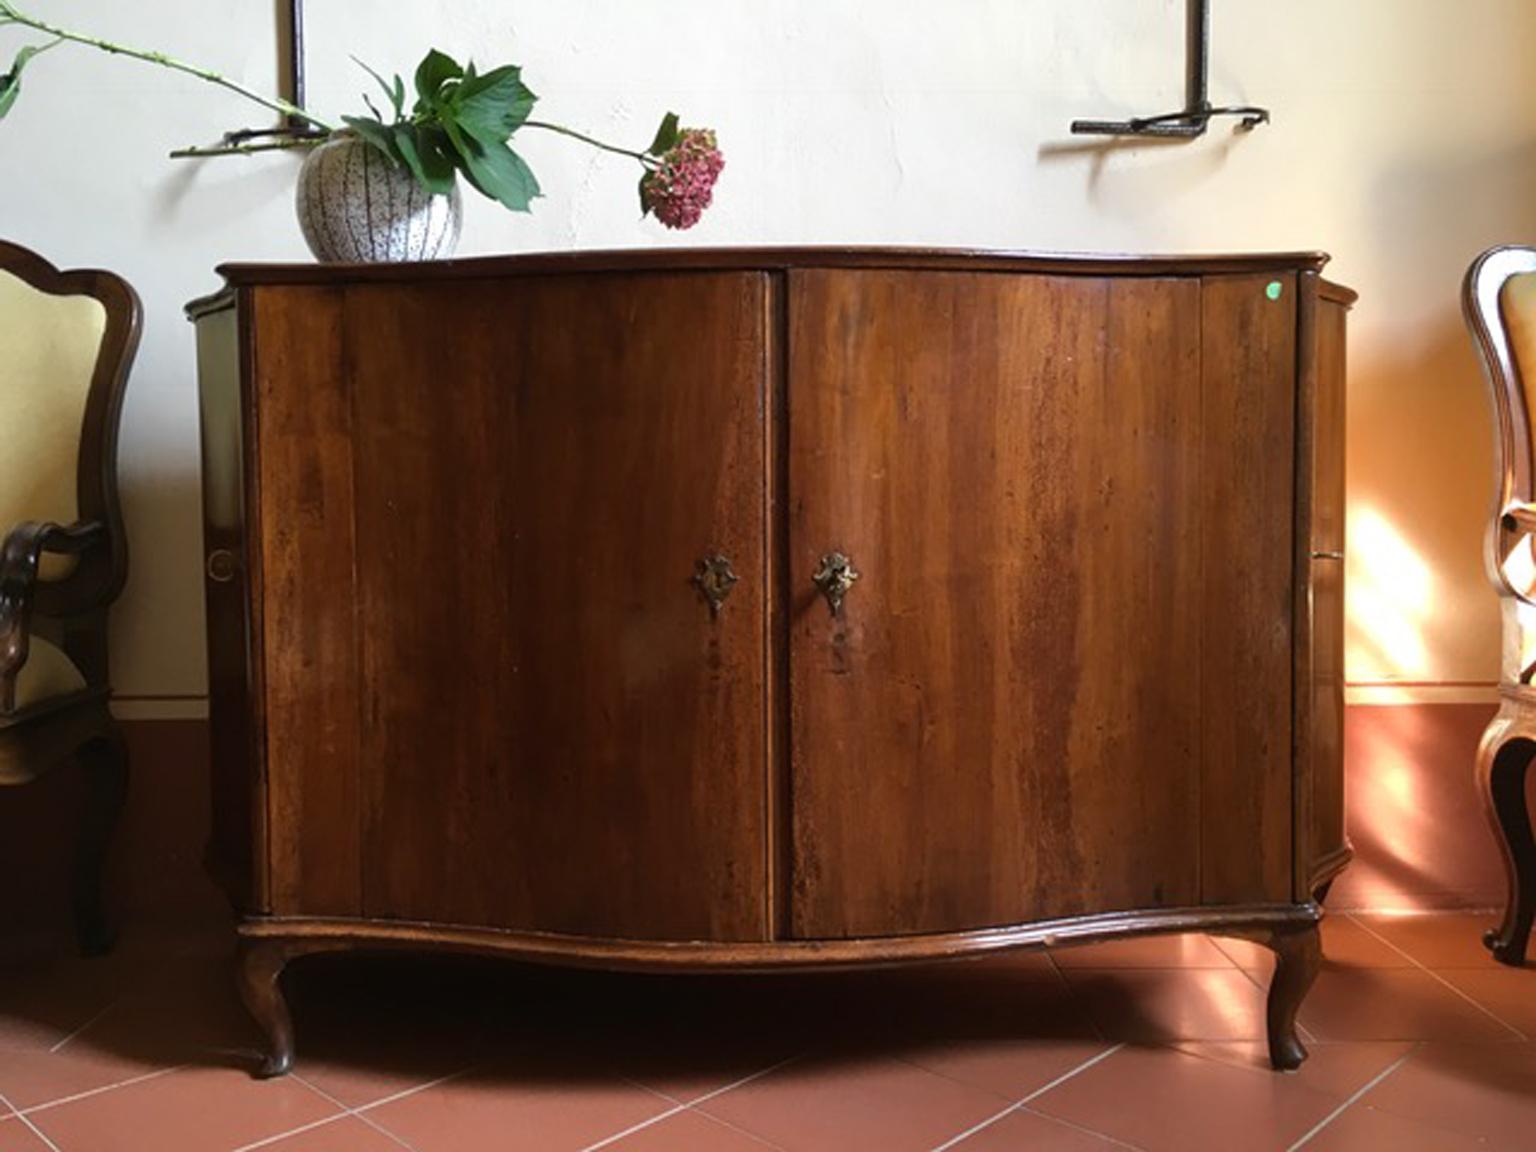 Venice Italy mid-18th Century  baaroque hand carved walnut sideboard

This gorgeous sideboard was hand carved in walnut by the Venetian artisans in the 18th century.
The front is curvy with two doors and there are two doors to open two more lockers